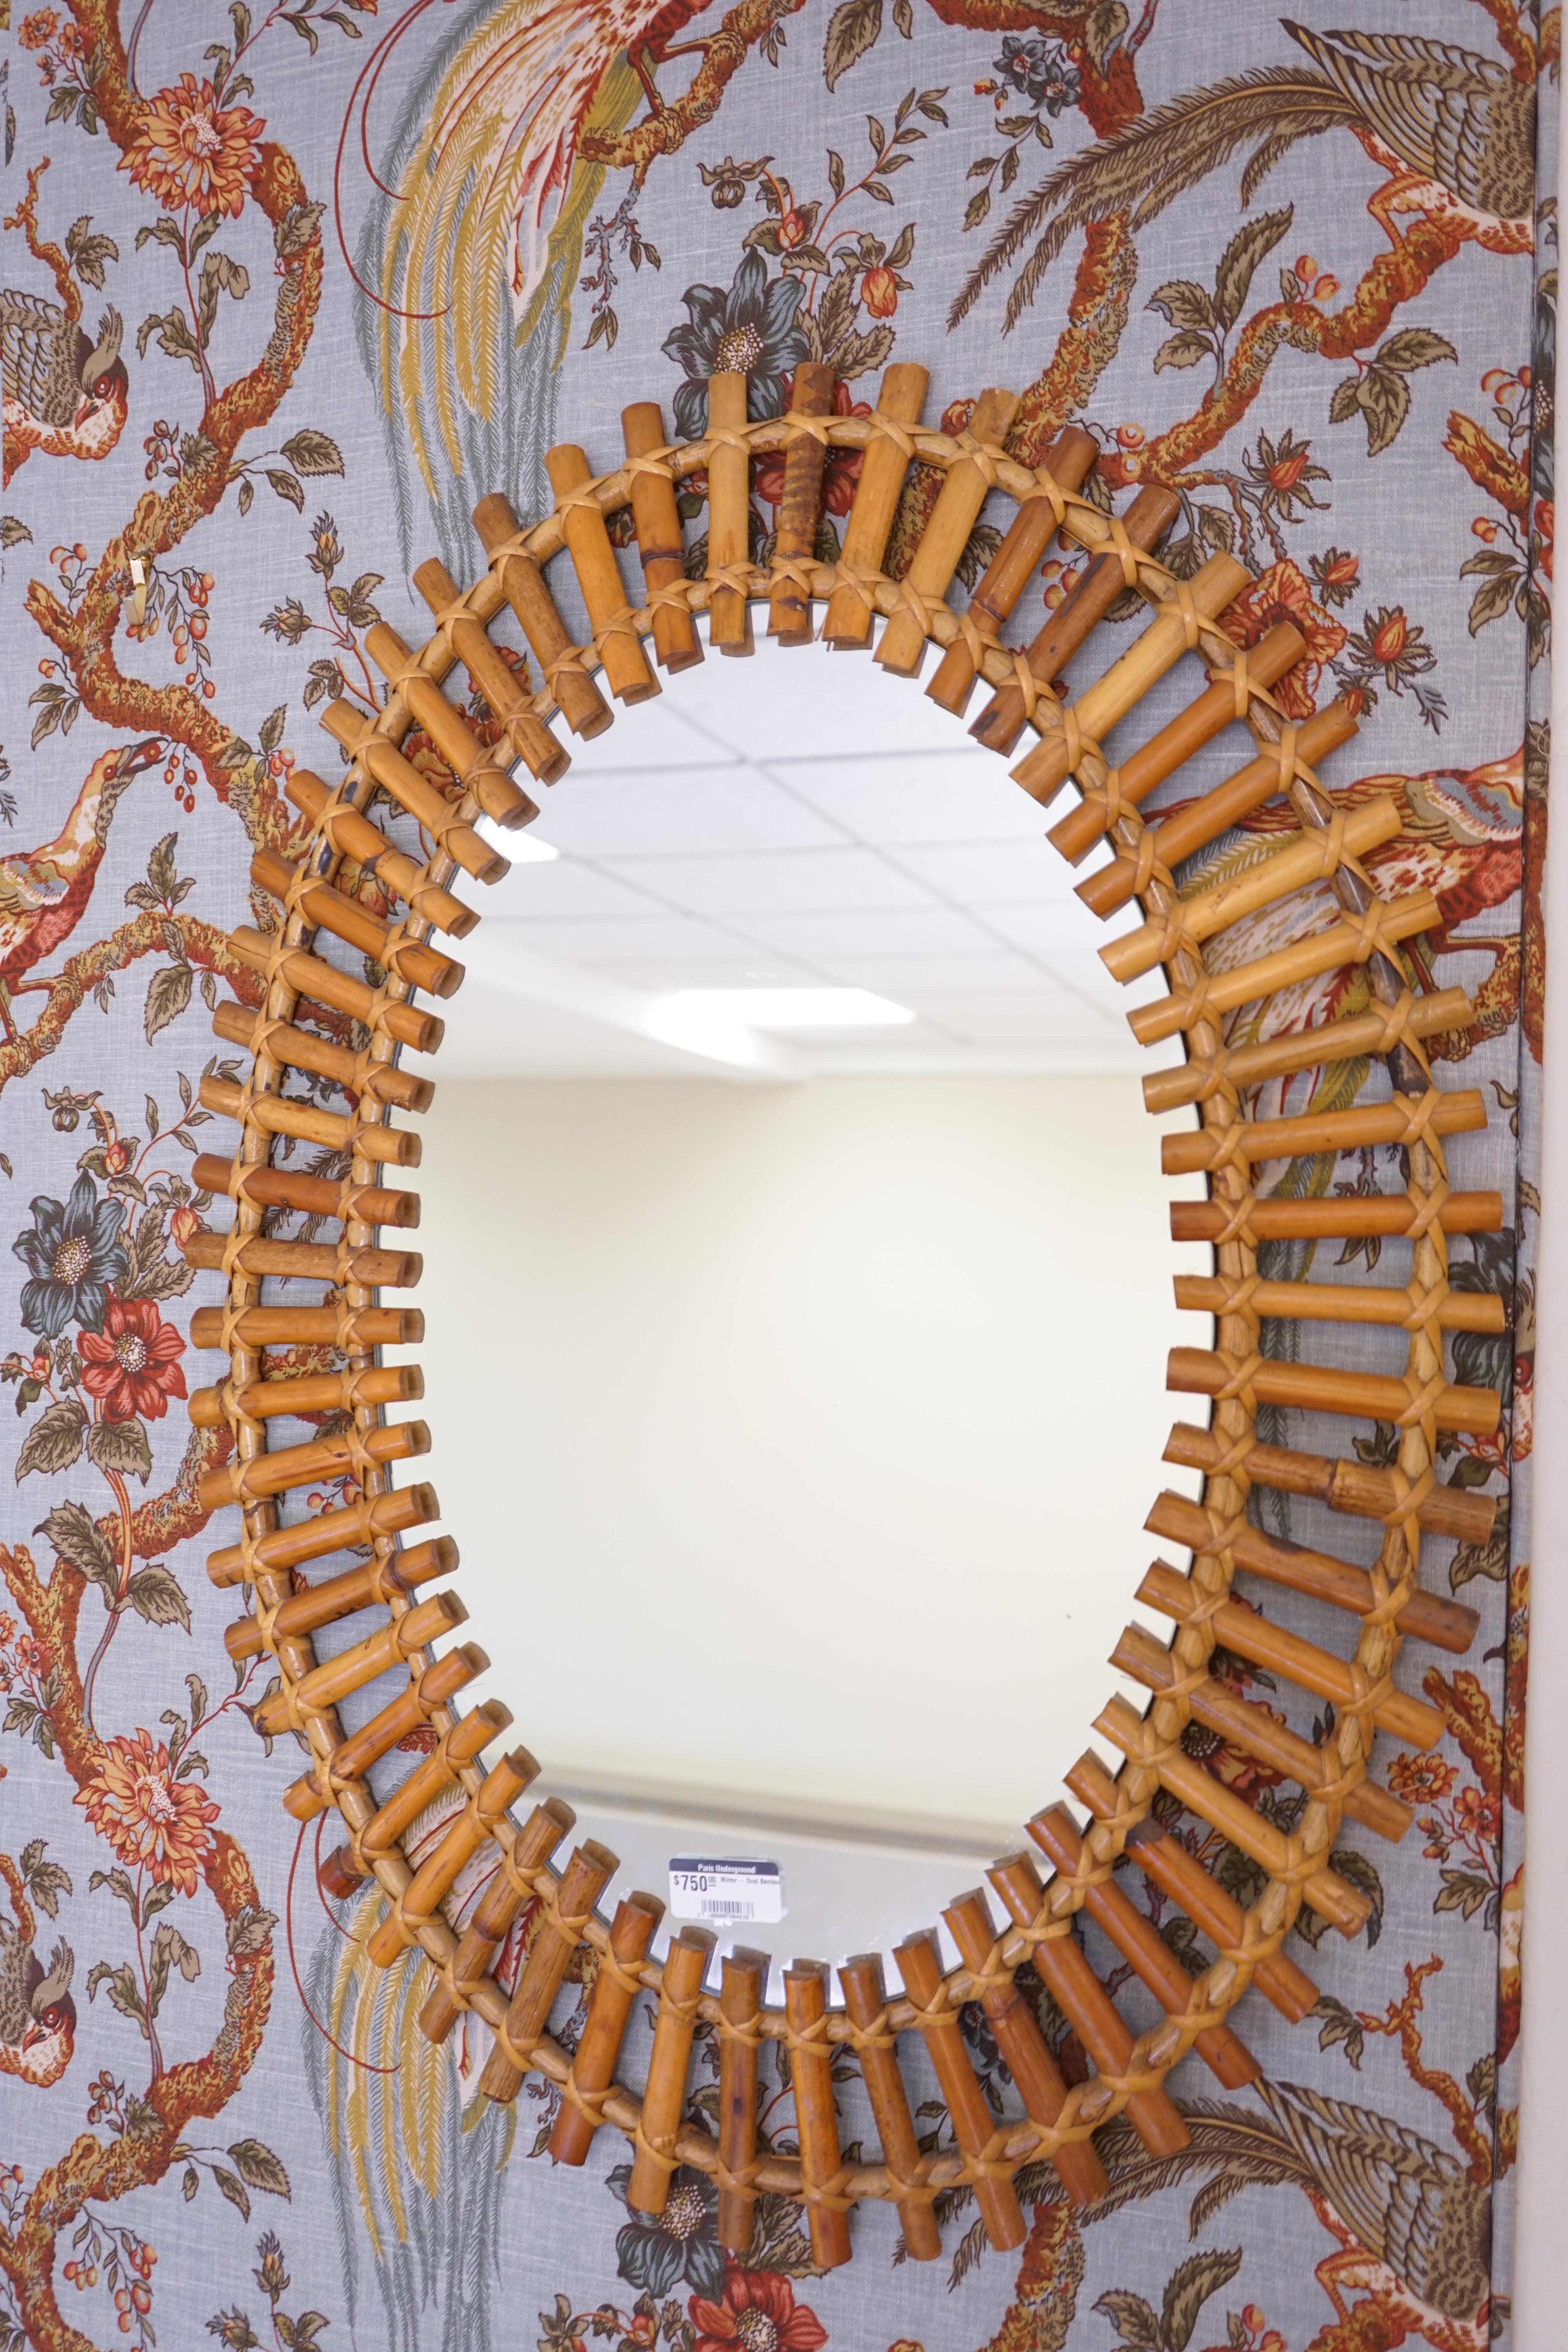 Vintage oval mirror framed by bamboo.